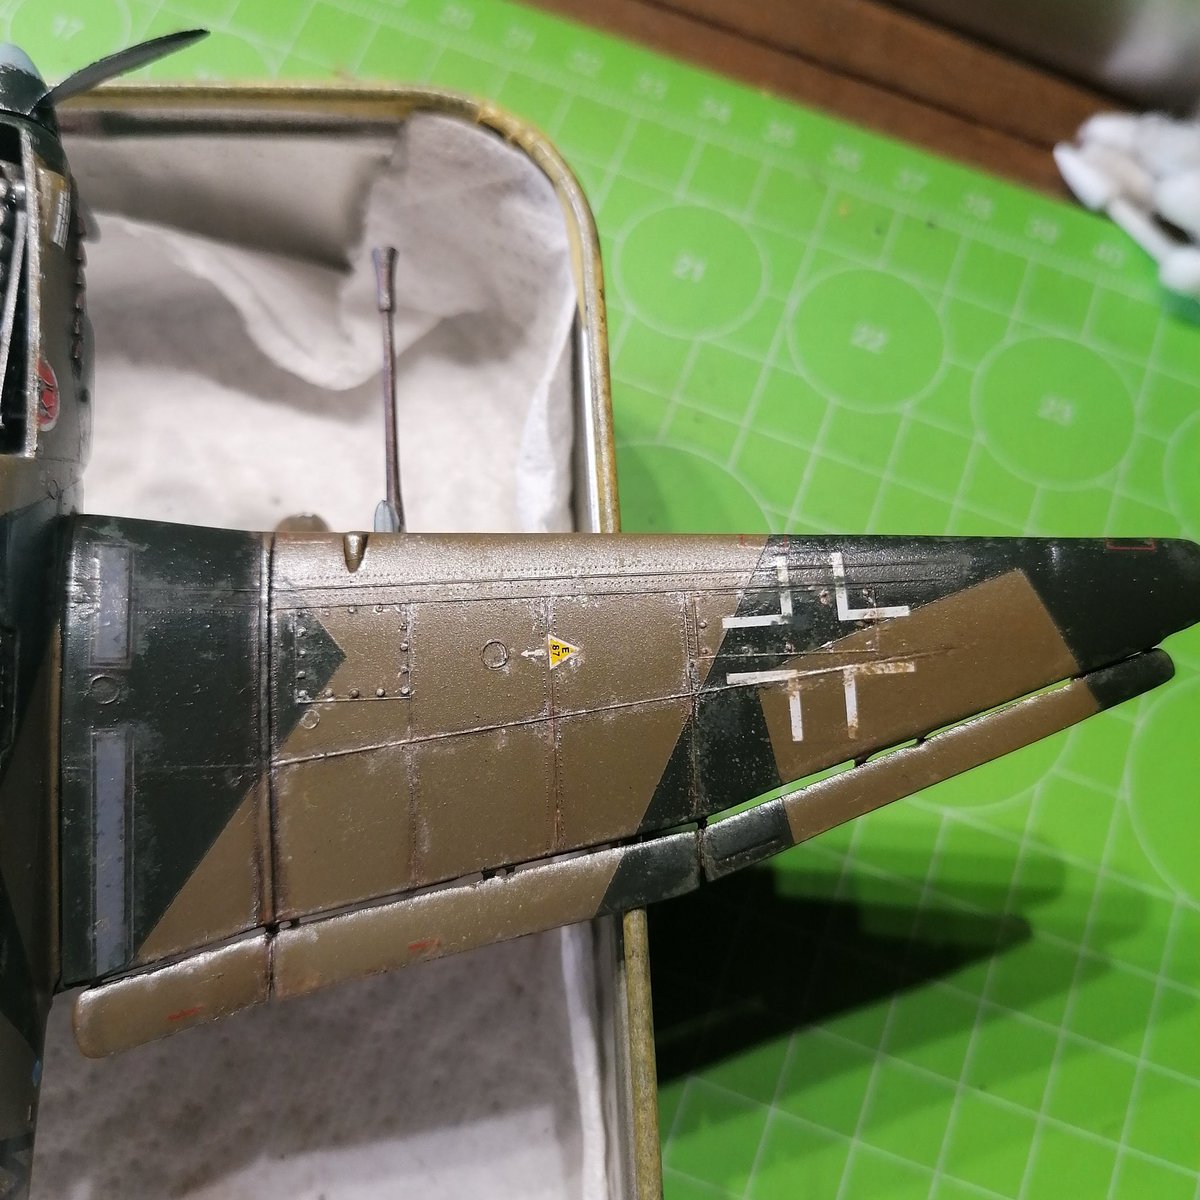 Weathering in progress
Cant wait to see it finished!
#chipping #172scalemodel #weathering #detailshot